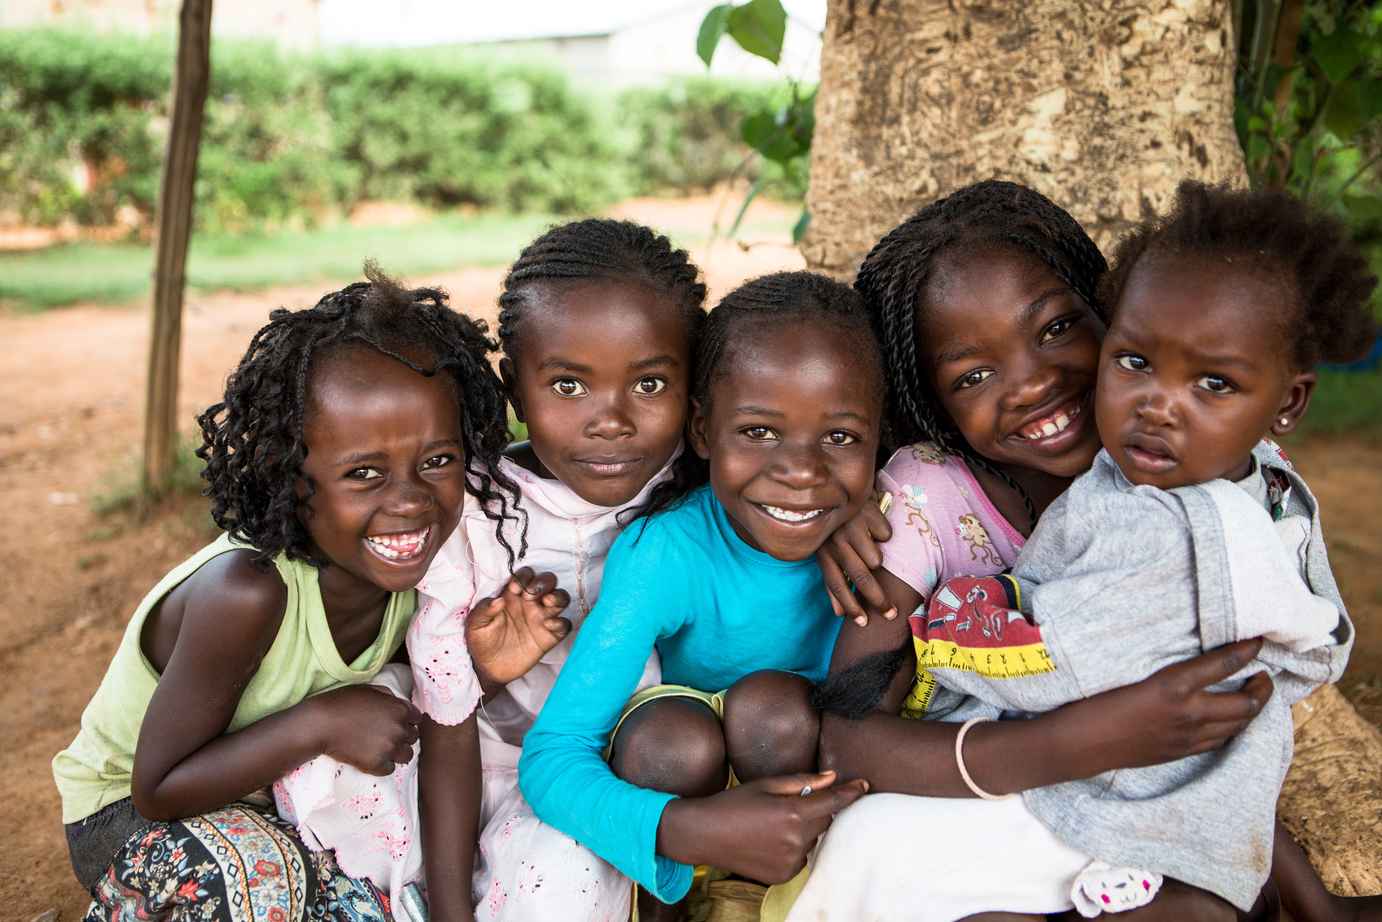 Young children fueled by good nutrition. As part of the Power of 5 Campaign, Amway is raising funds and awareness to provide nutrition to more than 500,000 malnourished children around the world by the end of 2019.